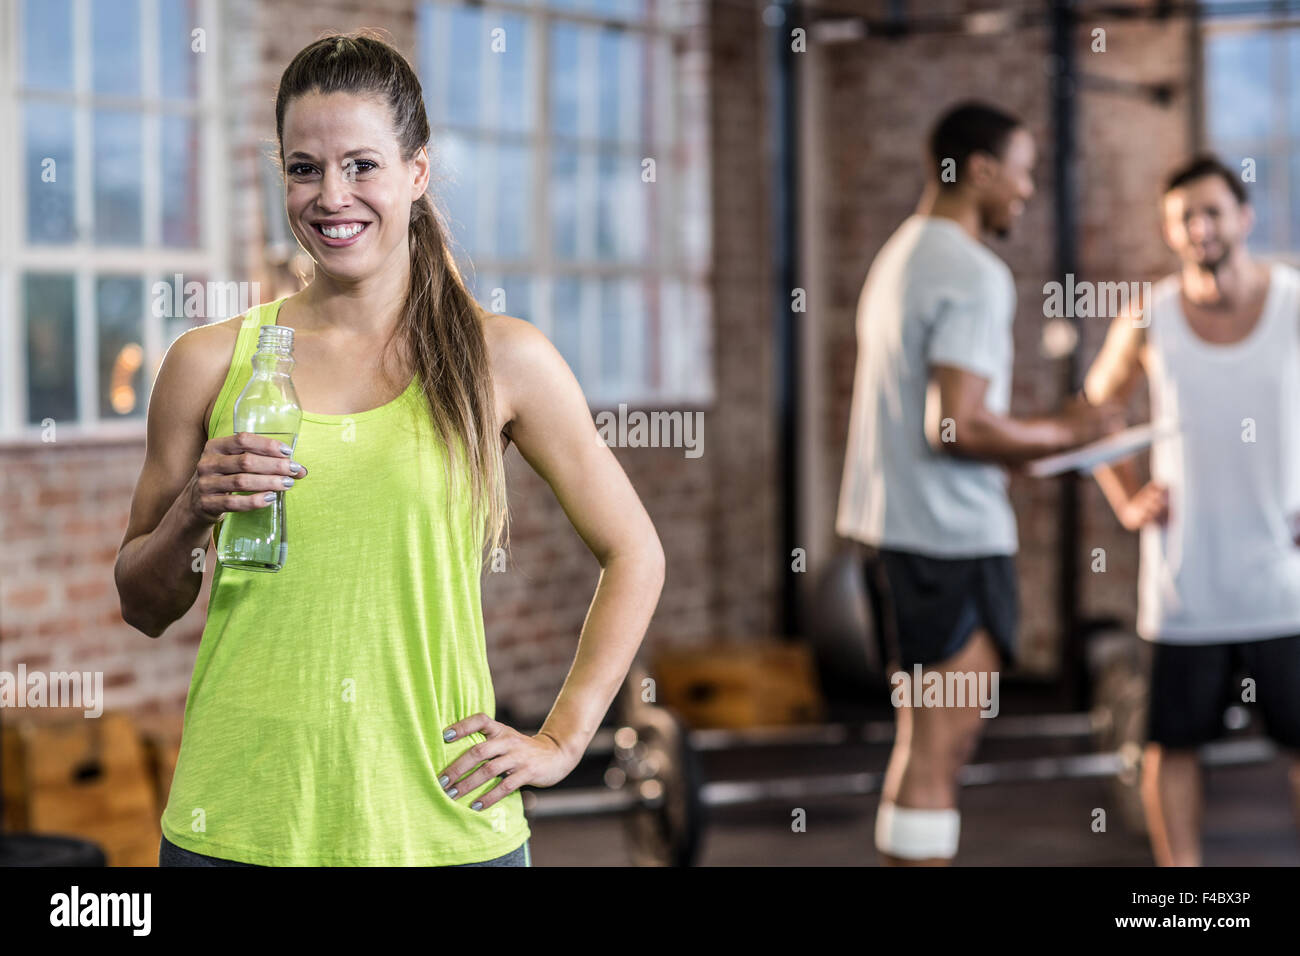 Young woman drinking water from a bottle with colleagues behind her Stock Photo